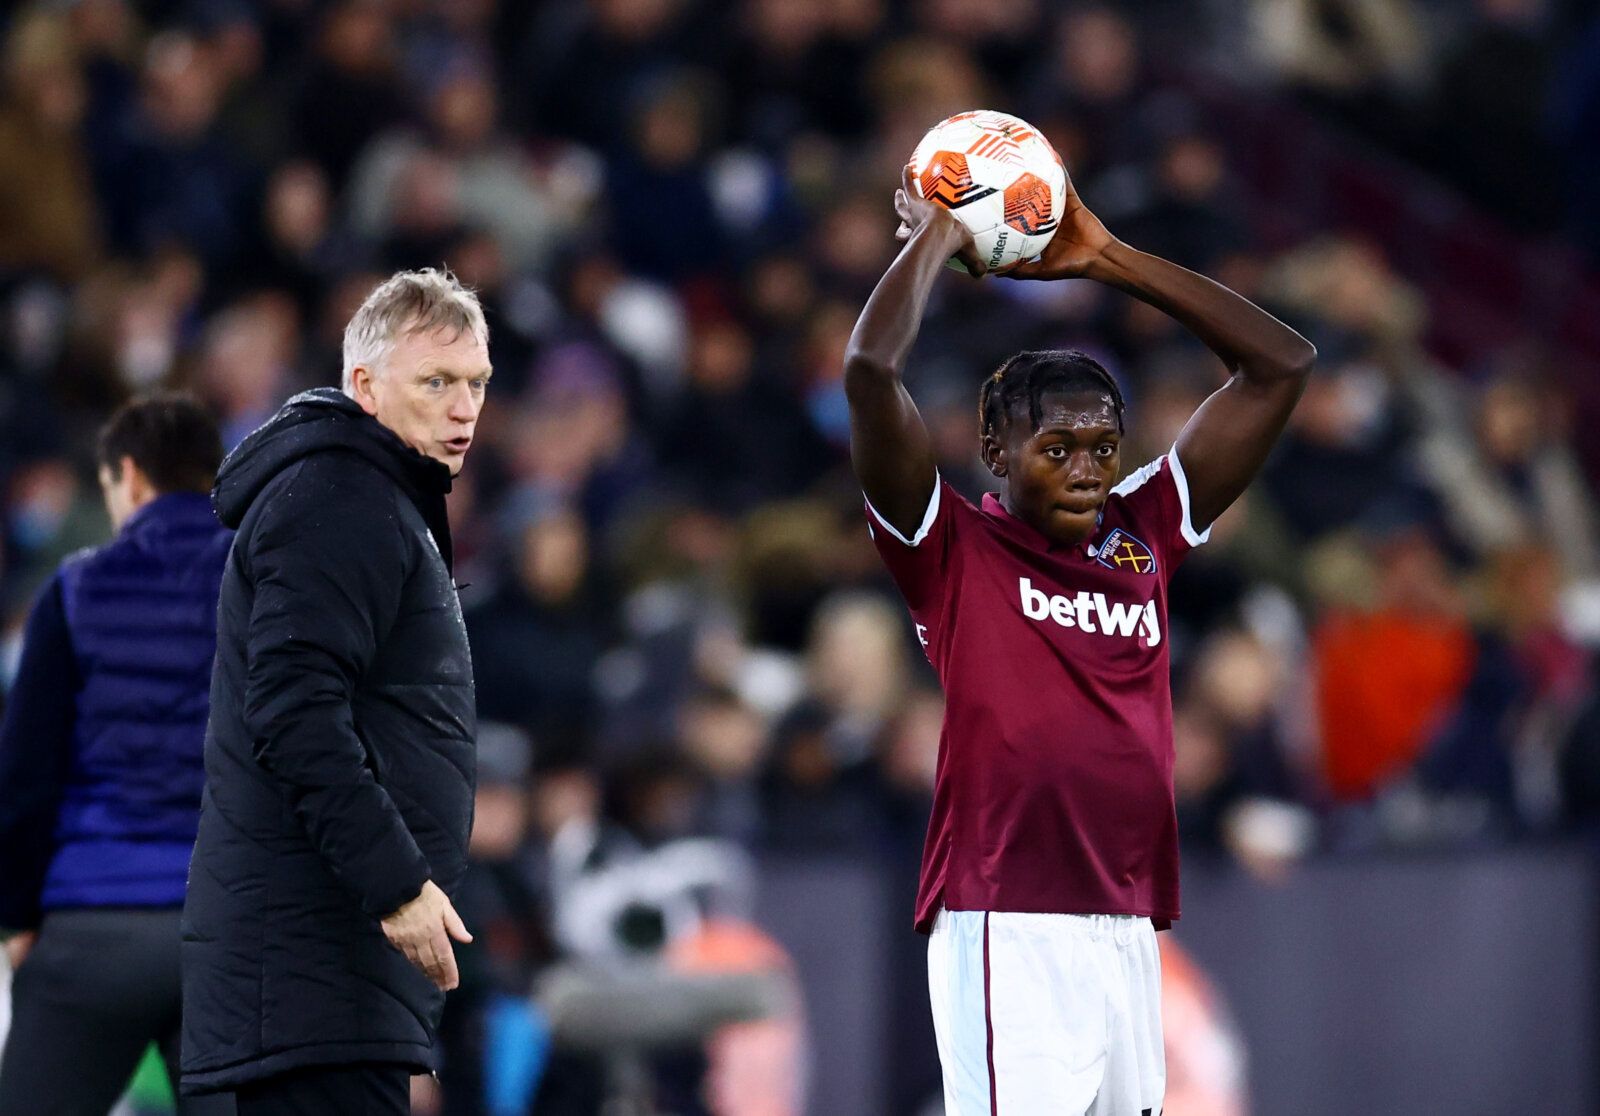 Soccer Football - Europa League - Group H - West Ham United v Dinamo Zagreb - London Stadium, London, Britain - December 9, 2021  West Ham United manager David Moyes looks on as Manny Longelo prepares to take a throw in REUTERS/David Klein